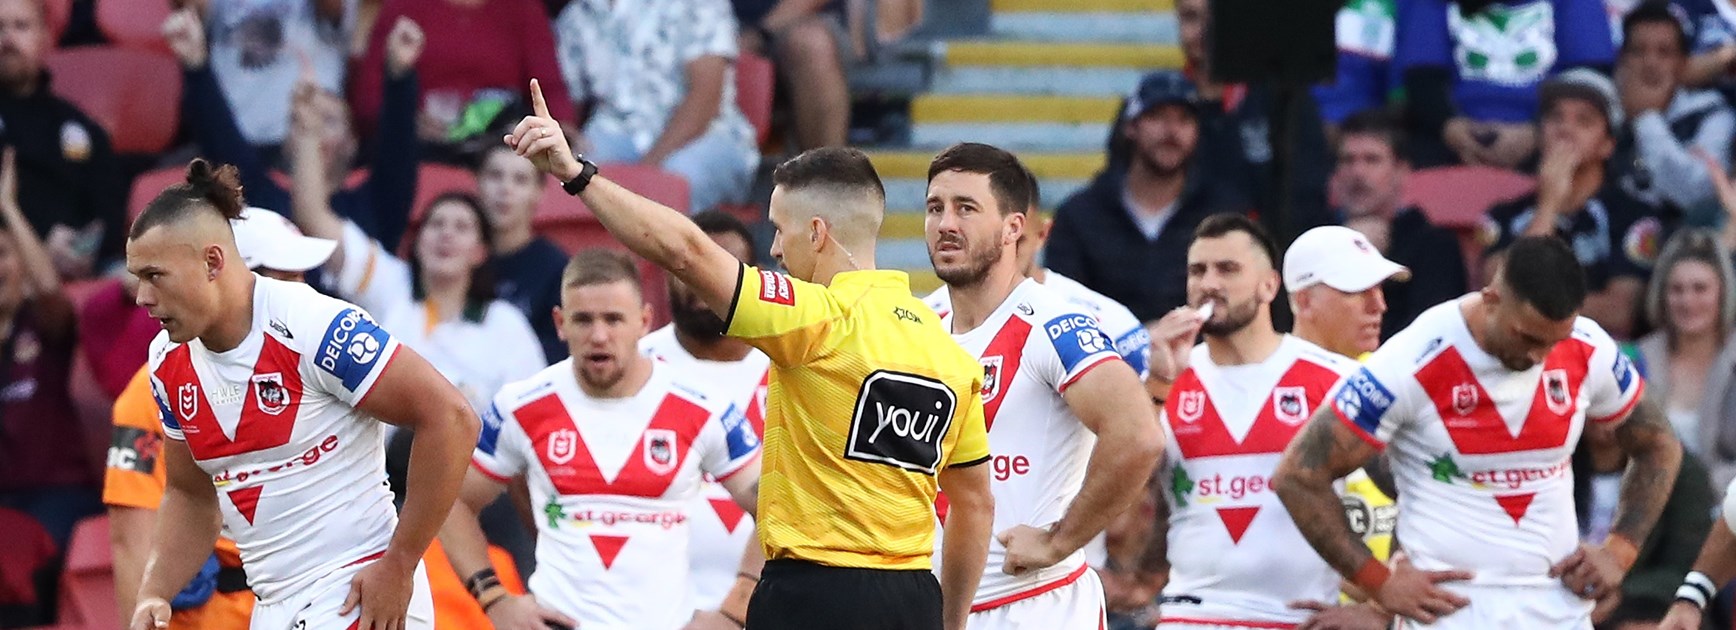 Don't let it be 'Tragic Round': Refs must keep high standards - Griffin